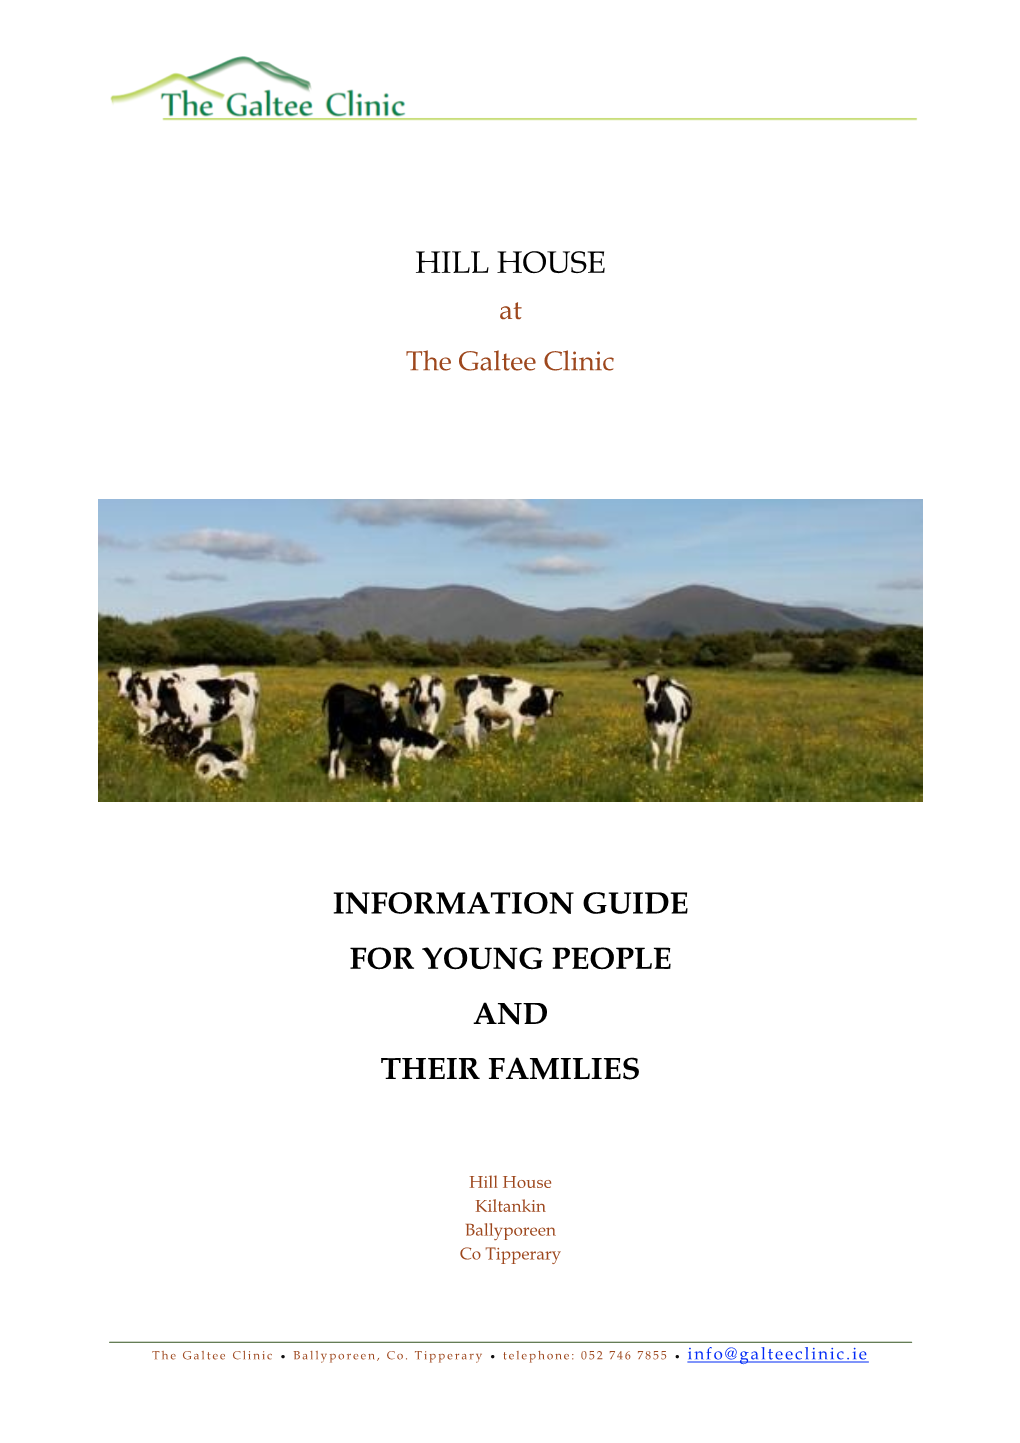 Hill House Information Guide for Young People and Their